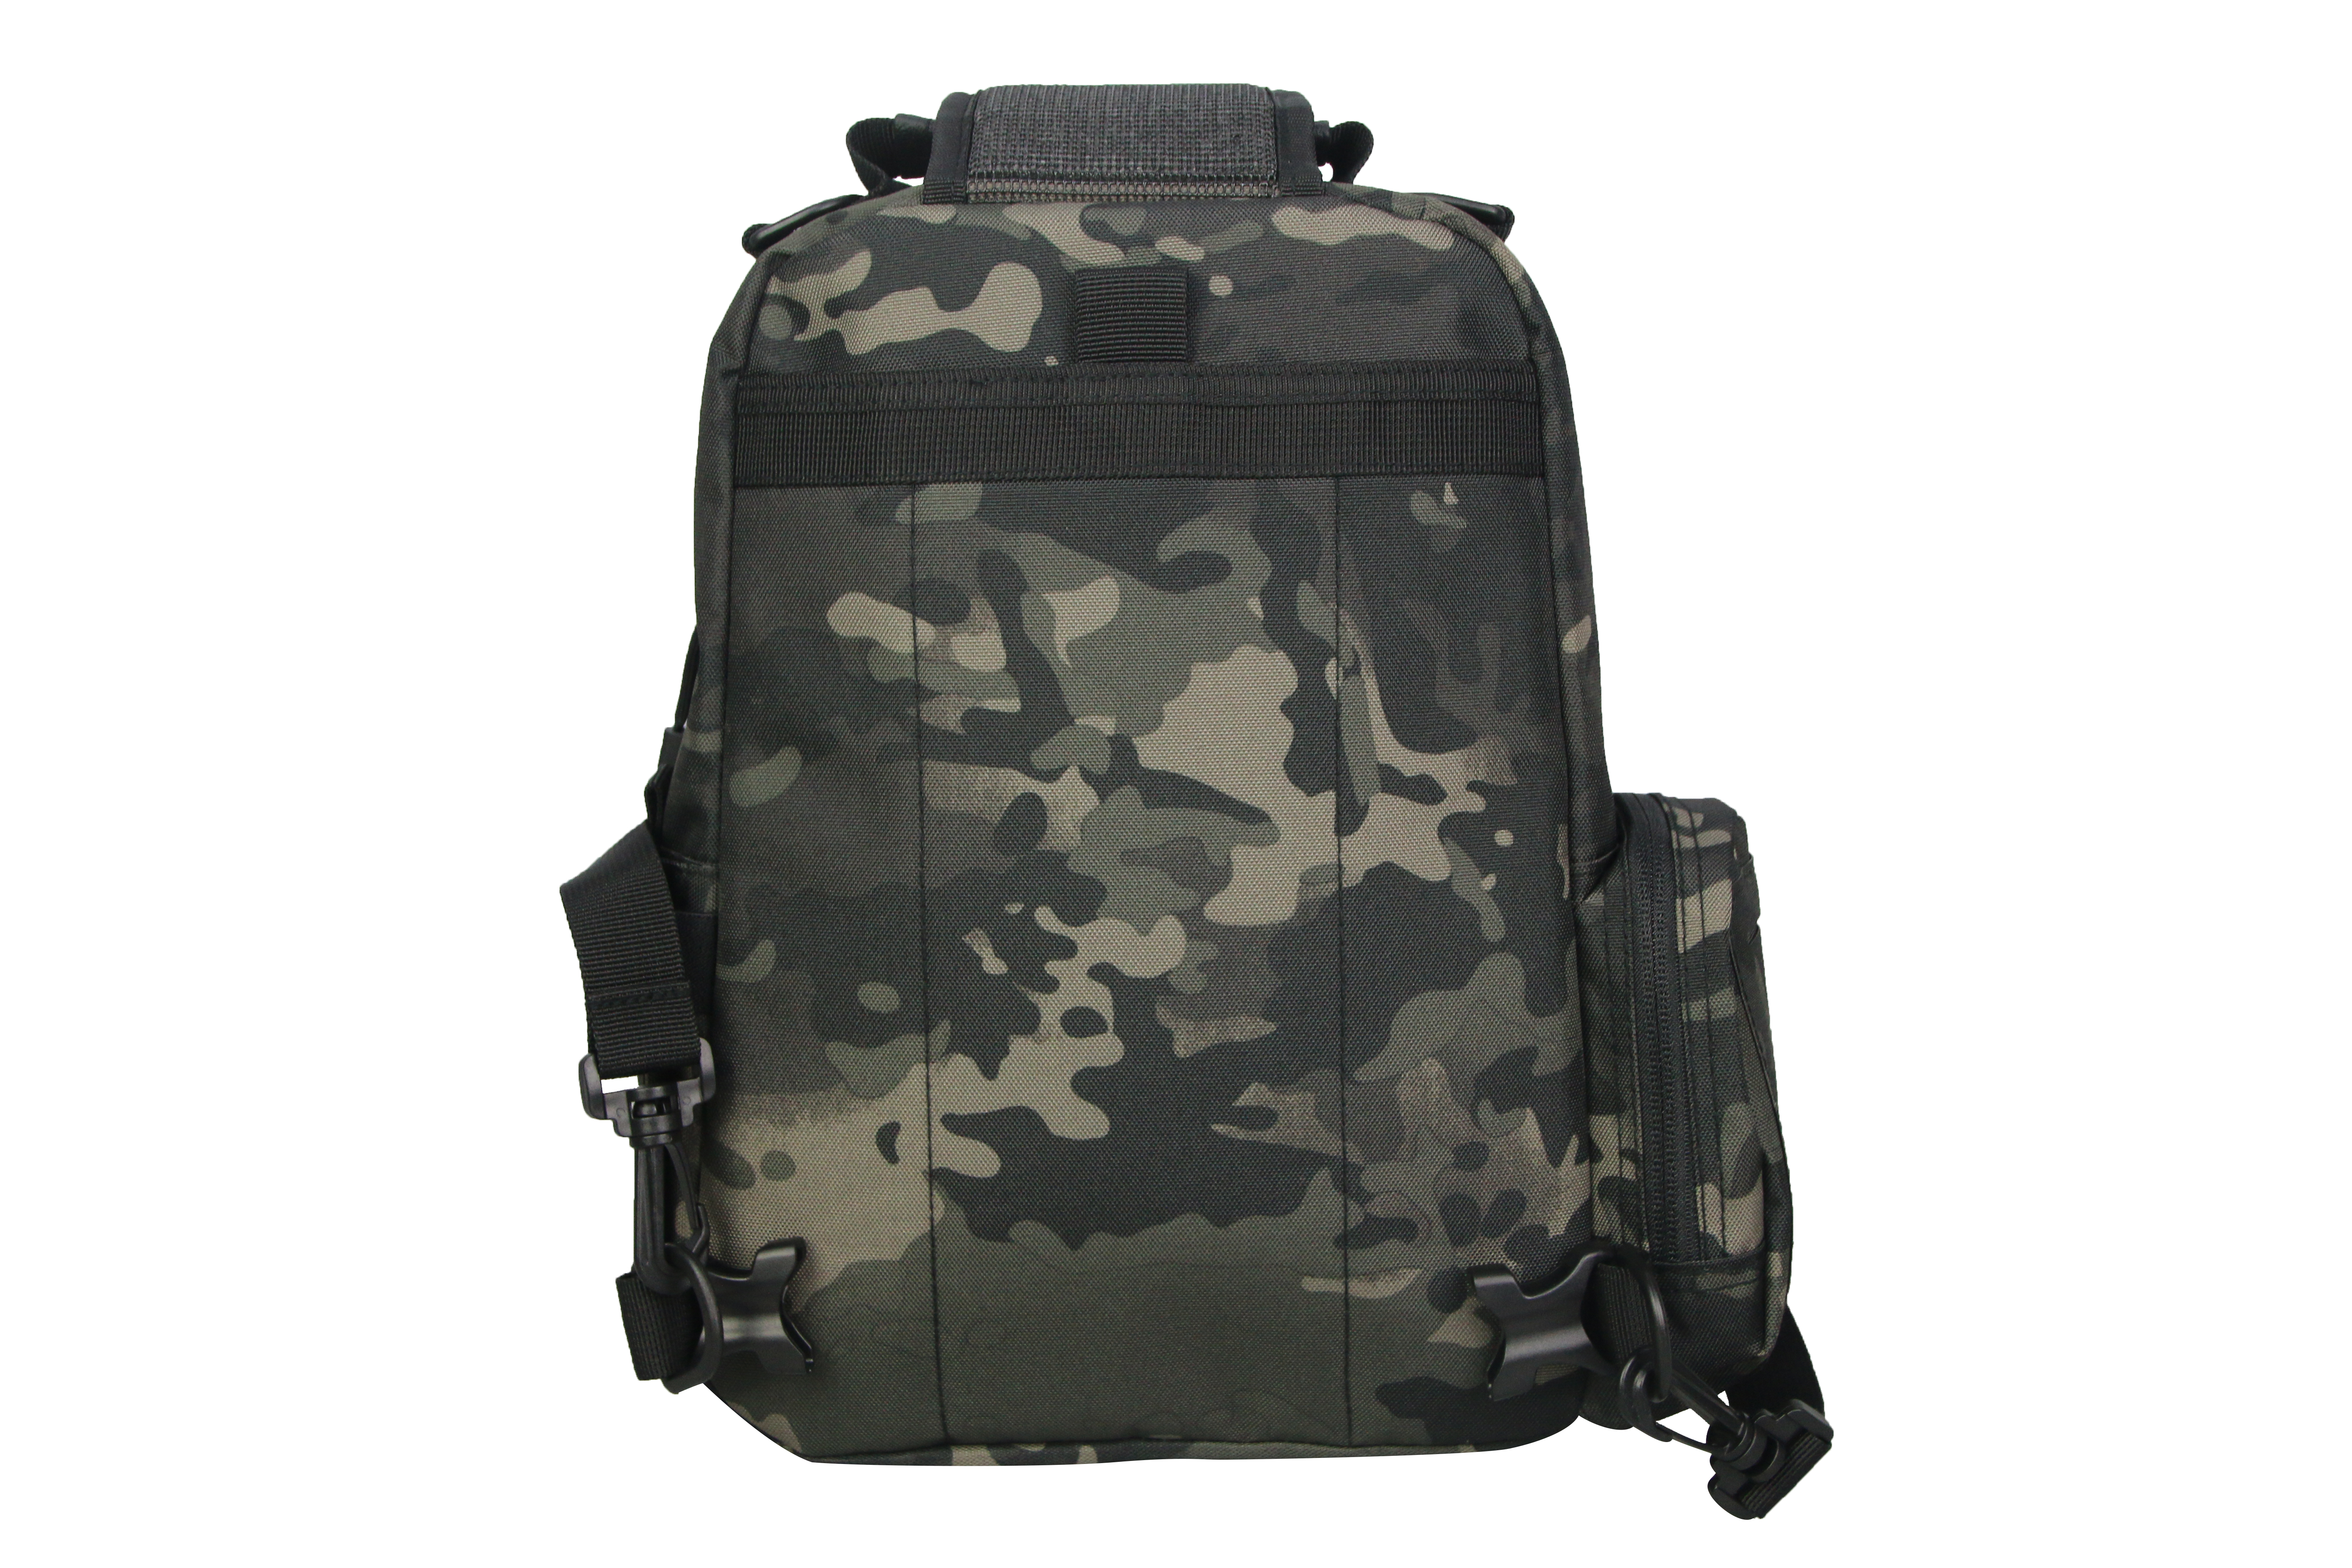 Sling Tactical Sling Rover Militaire Sling EDC Sac à dos EDC